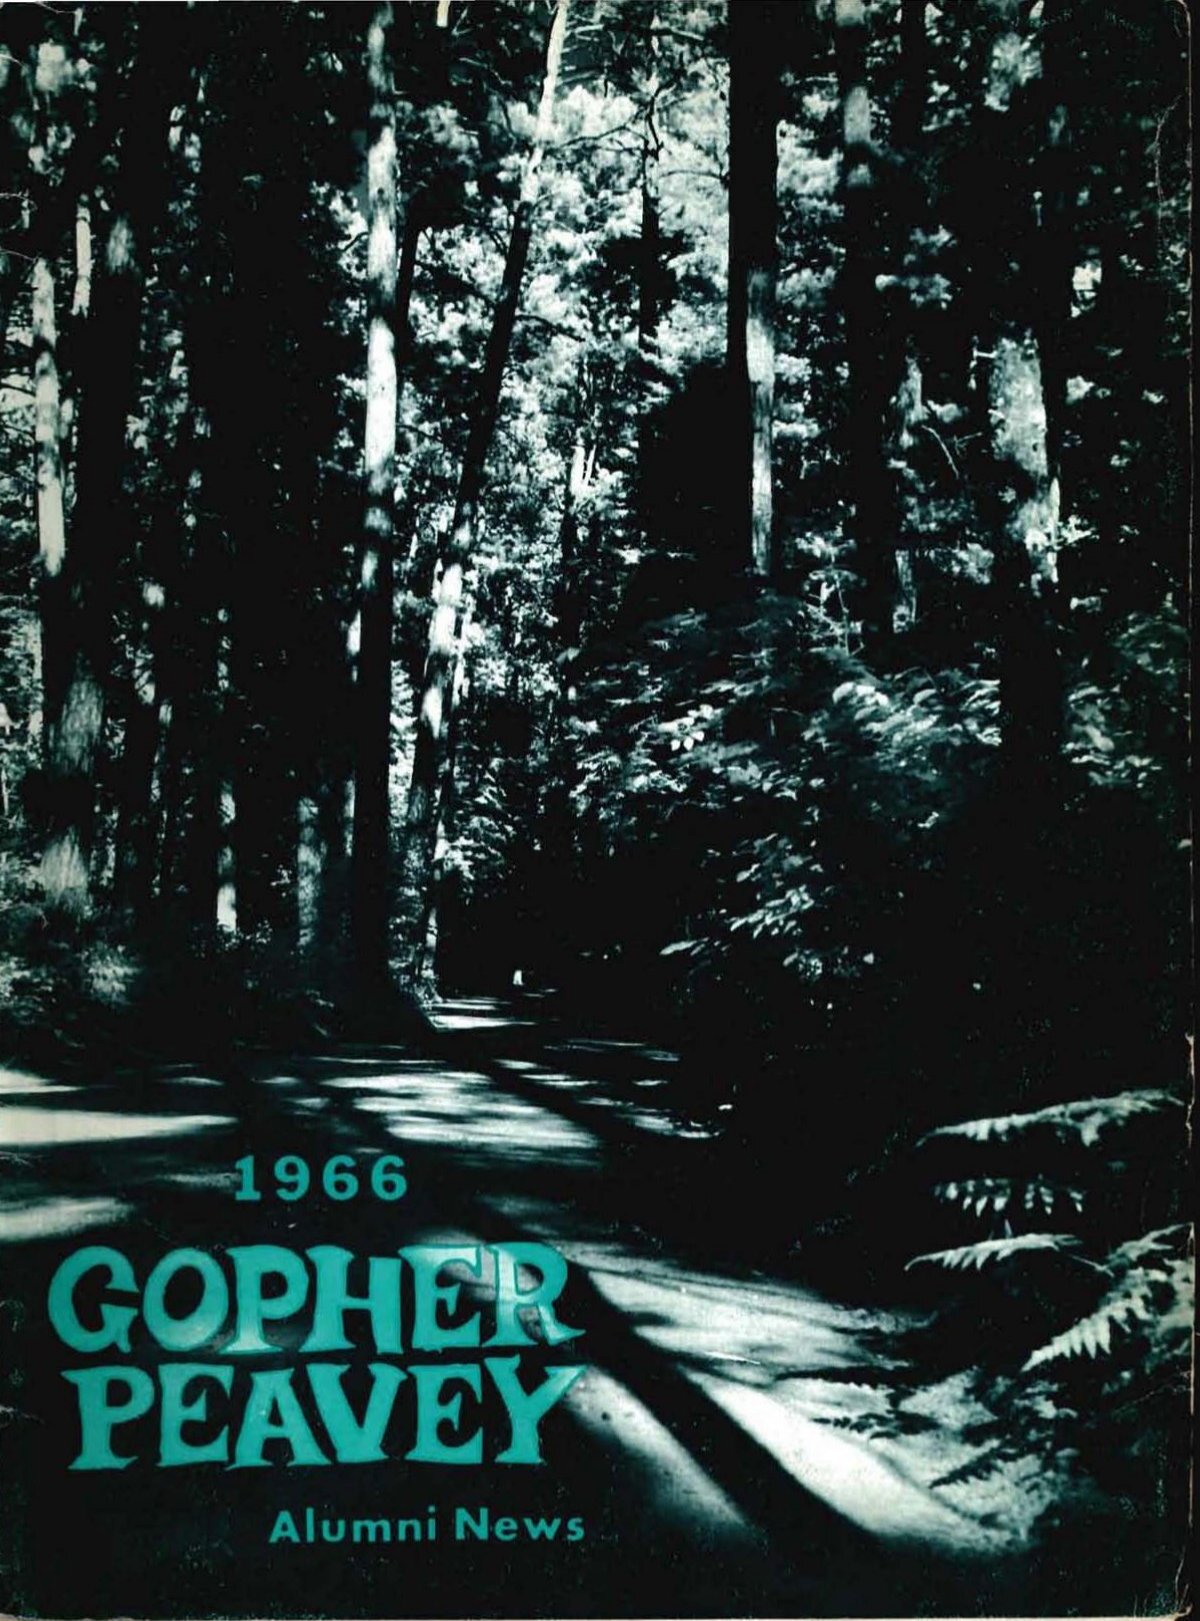 Gopher Peavey 1966 - Department of Forest Resources - University